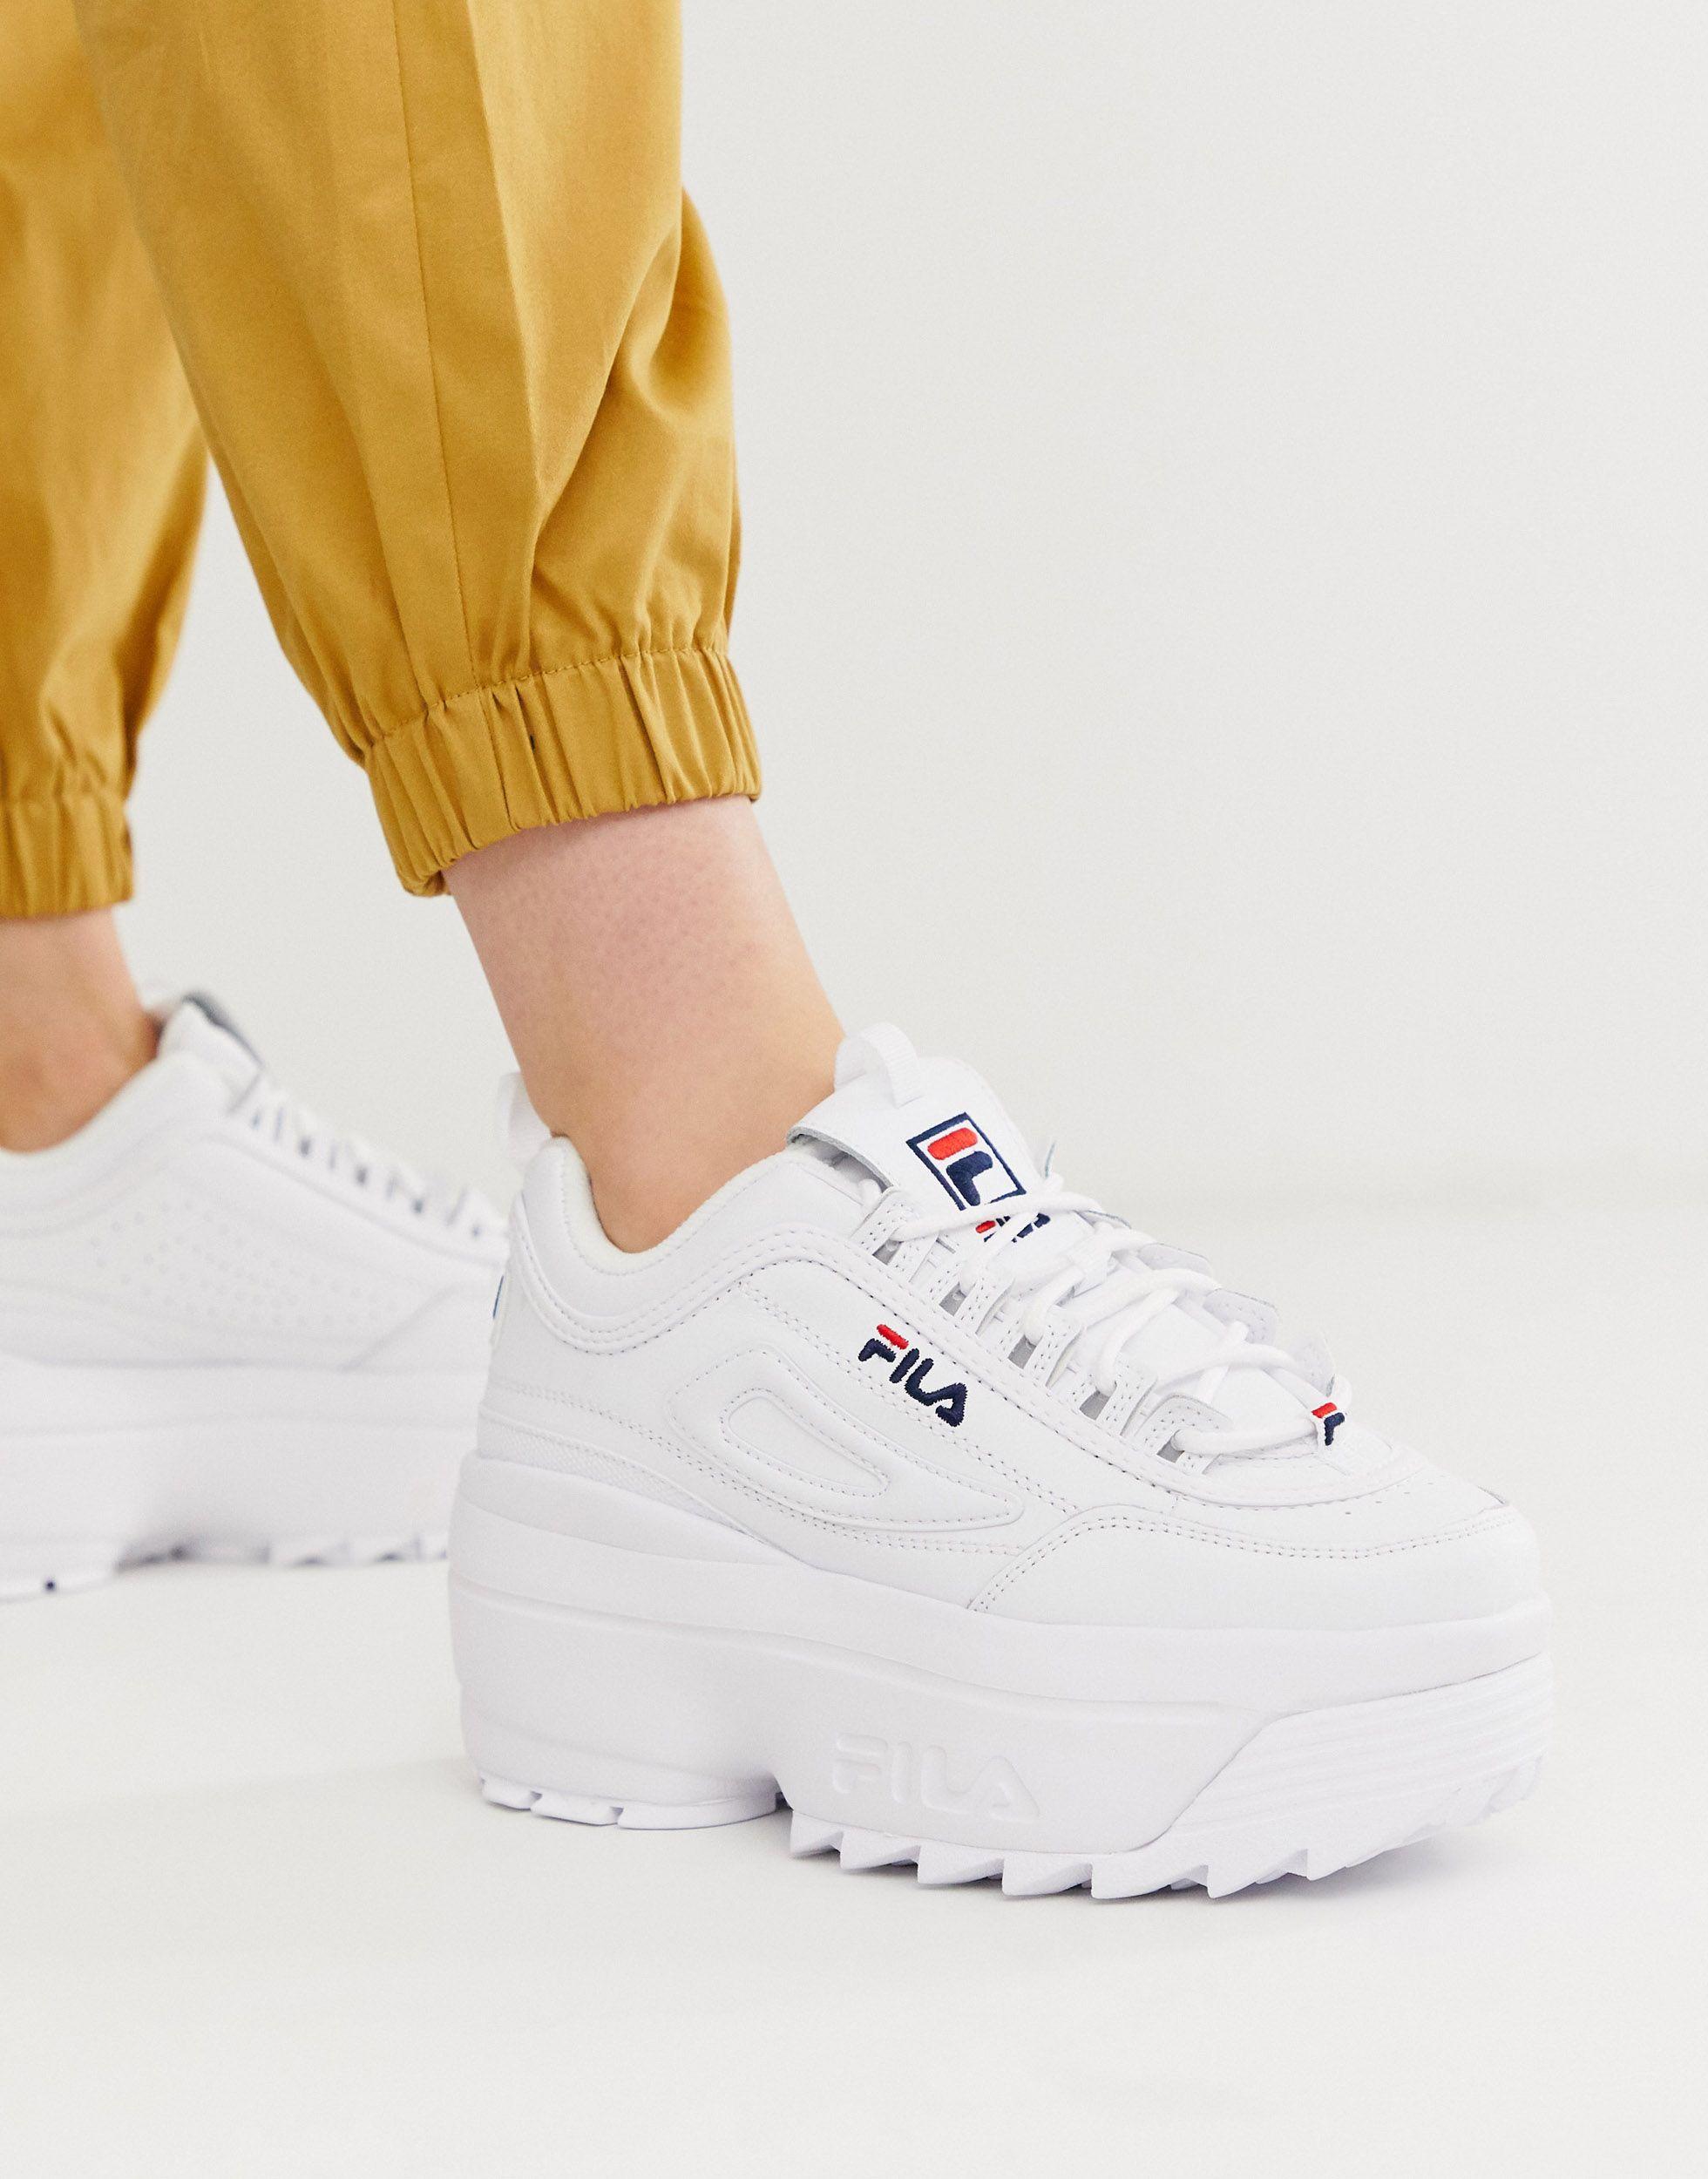 Fila Leather Disruptor Ii Platform Wedge Trainers in White | Lyst